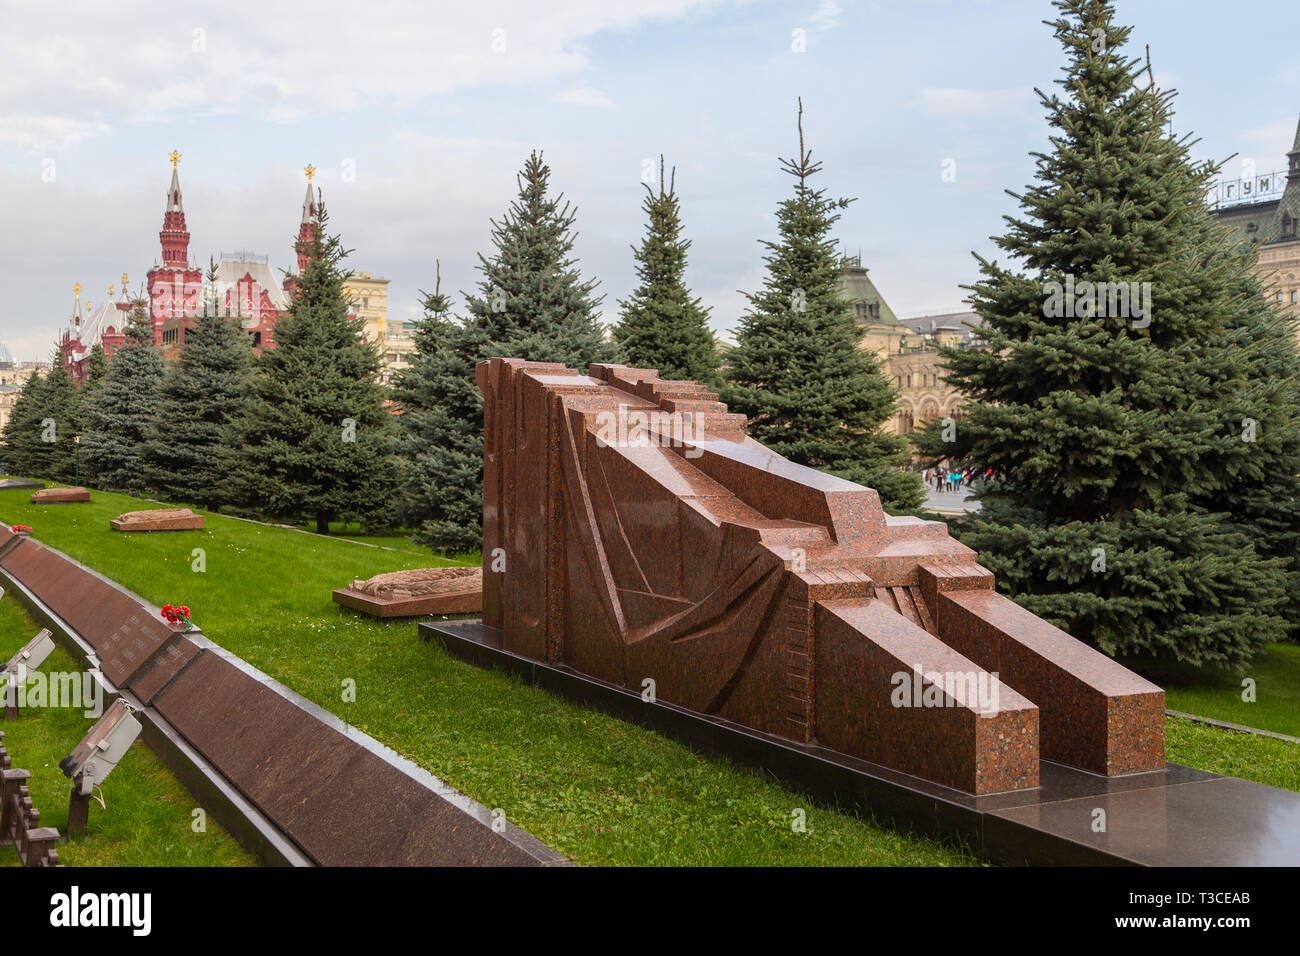 Moscow, Russia- 23 September 2014: Burials in the Kremlin Wall Necropolis. Tombs notable politicians, military leaders, cosmonauts and scientists. Stock Photo